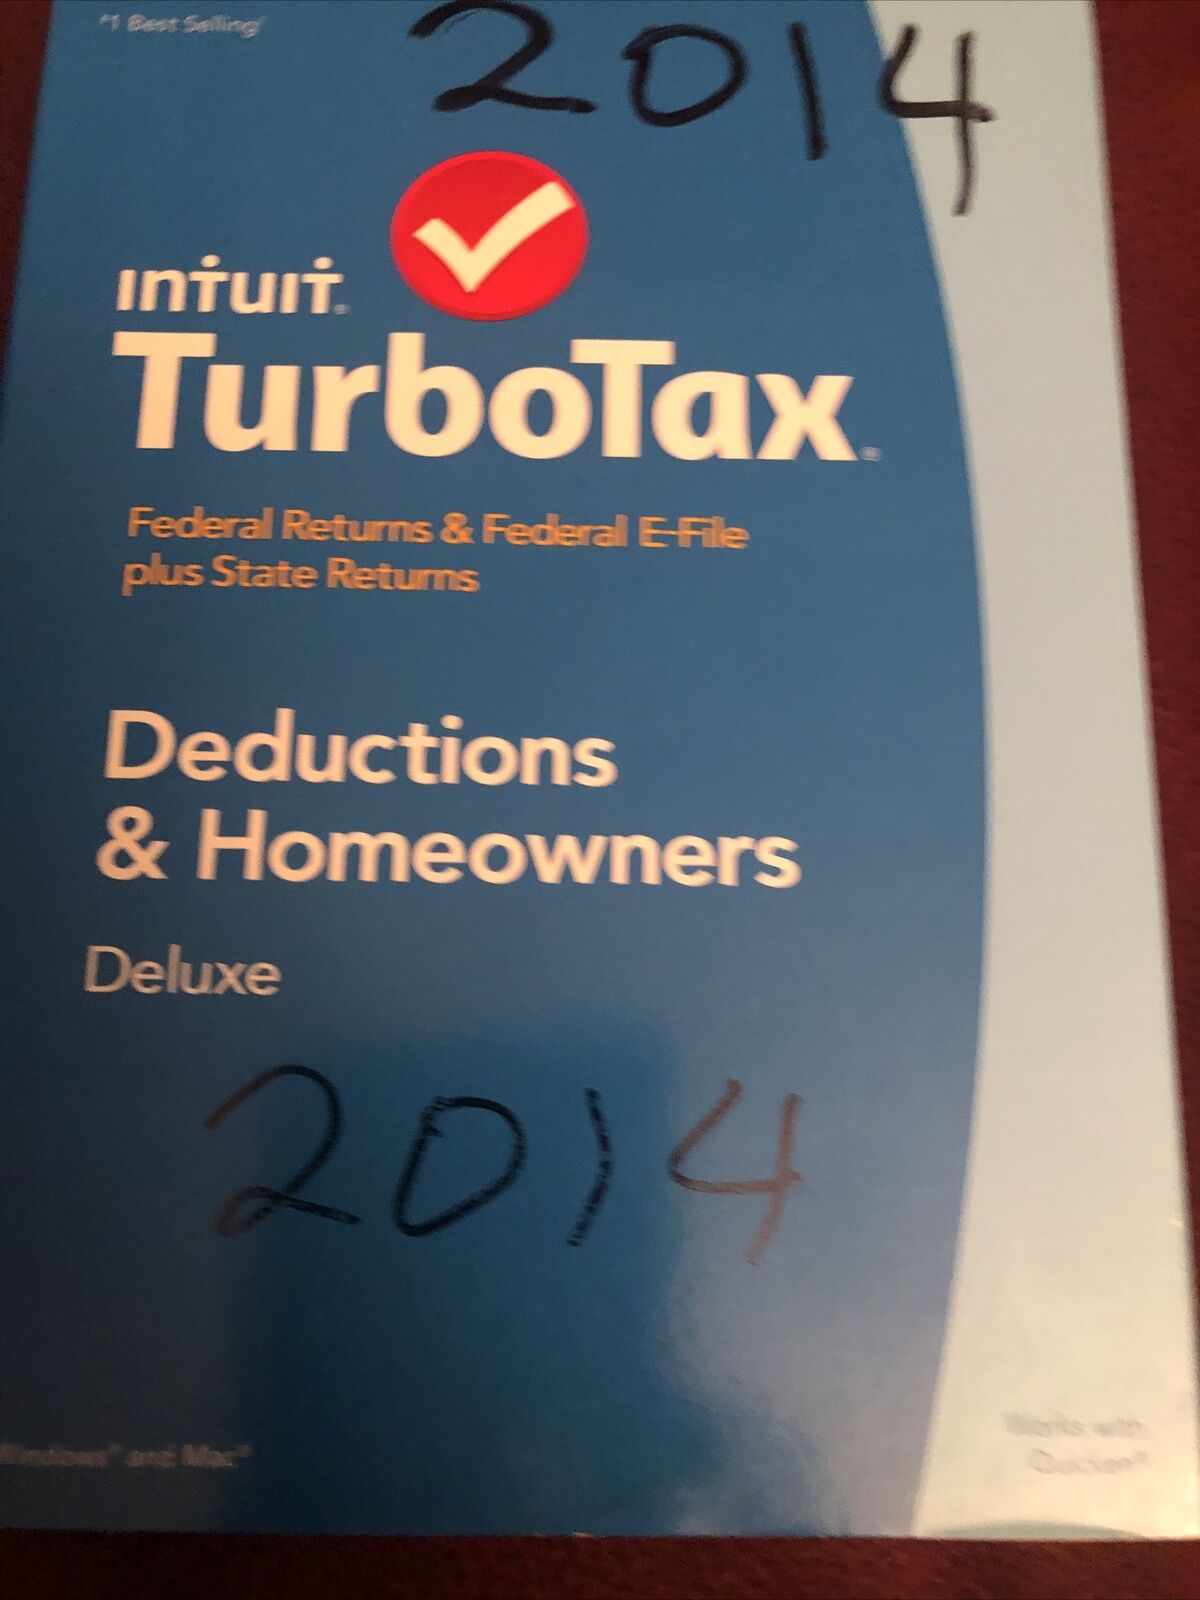 Intuit Turbo Tax 2014 Deluxe Deductions & Homeowners Edition Federal E-File Stat